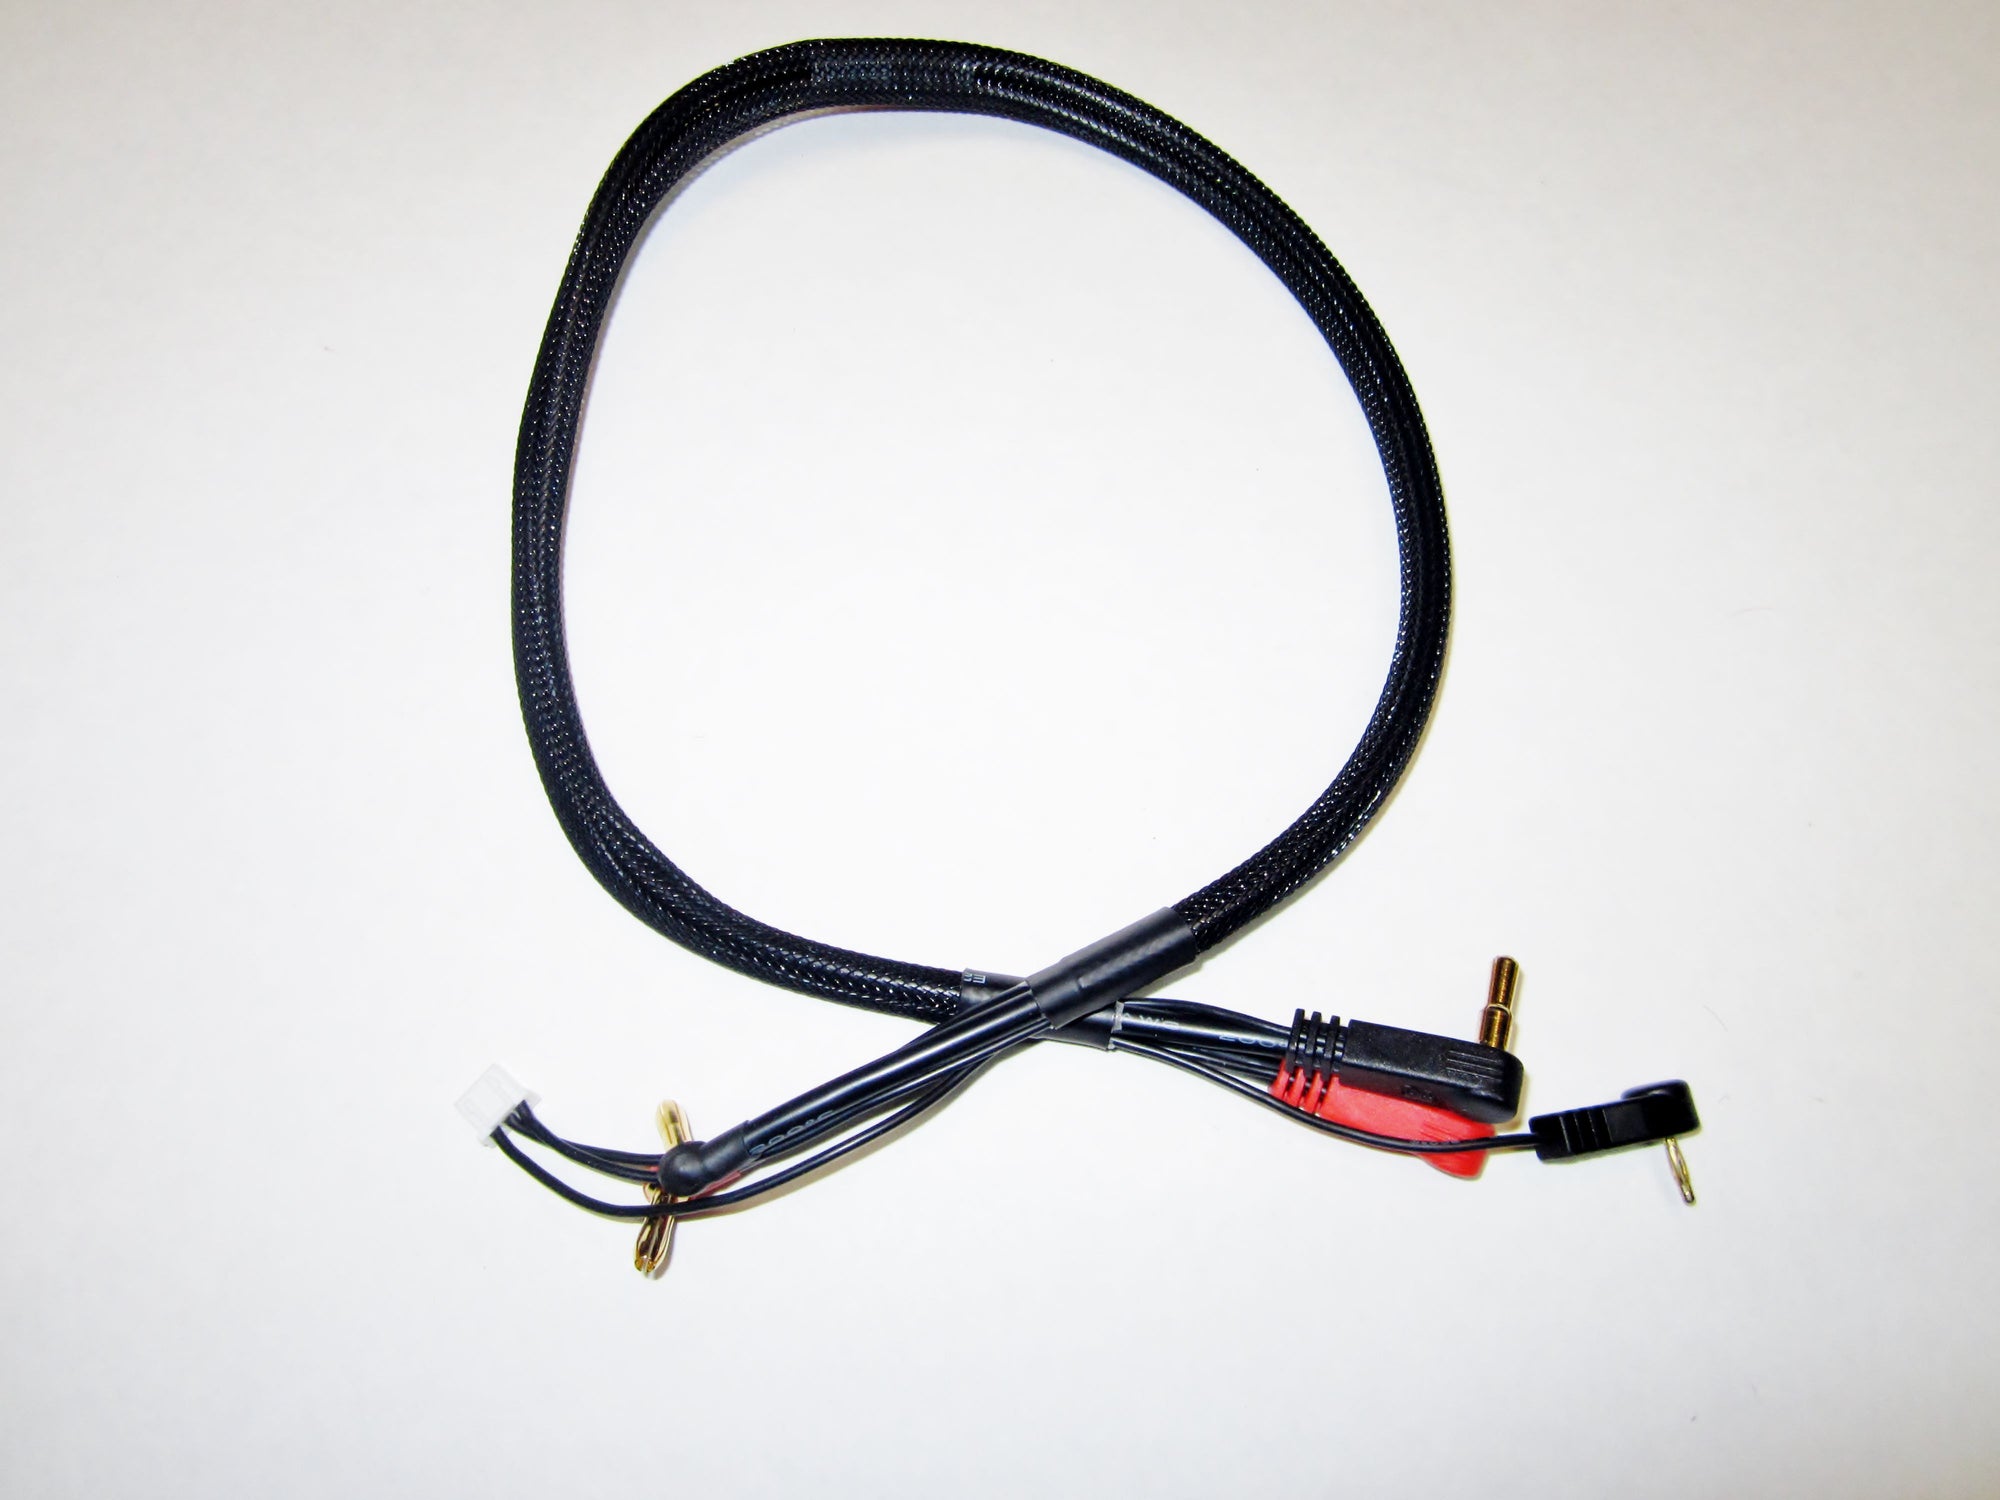 TQ 2 Cell Strain Relief Charge Cable